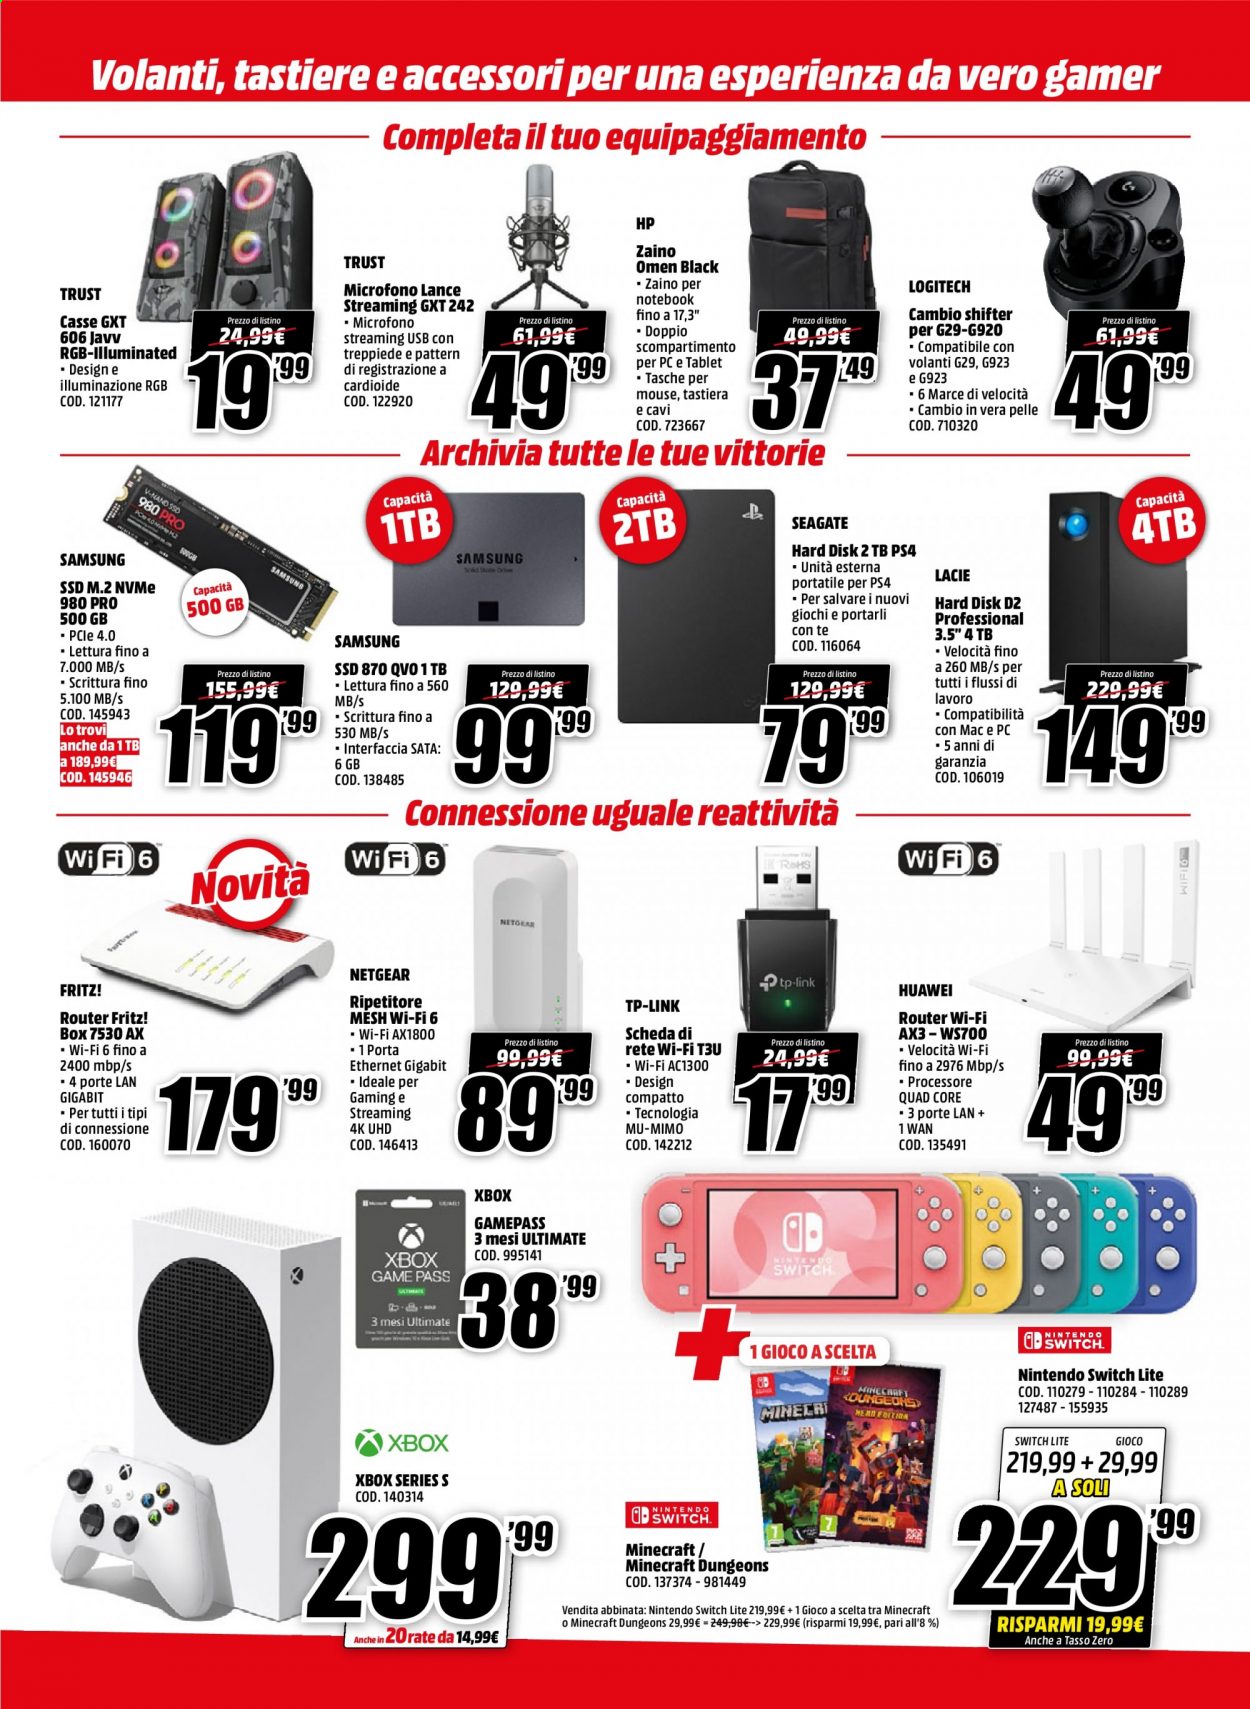 thumbnail - Volantino MediaWorld - 1/9/2021 - 12/9/2021 - Prodotti in offerta - Hewlett-Packard, Huawei, tablet, Samsung, notebook, tastiera, router, Seagate, TP-Link, mouse, Logitech, router WiFi, Nintendo Switch, PlayStation 4, Xbox, Xbox Series S, Nintendo Switch Lite. Pagina 3.